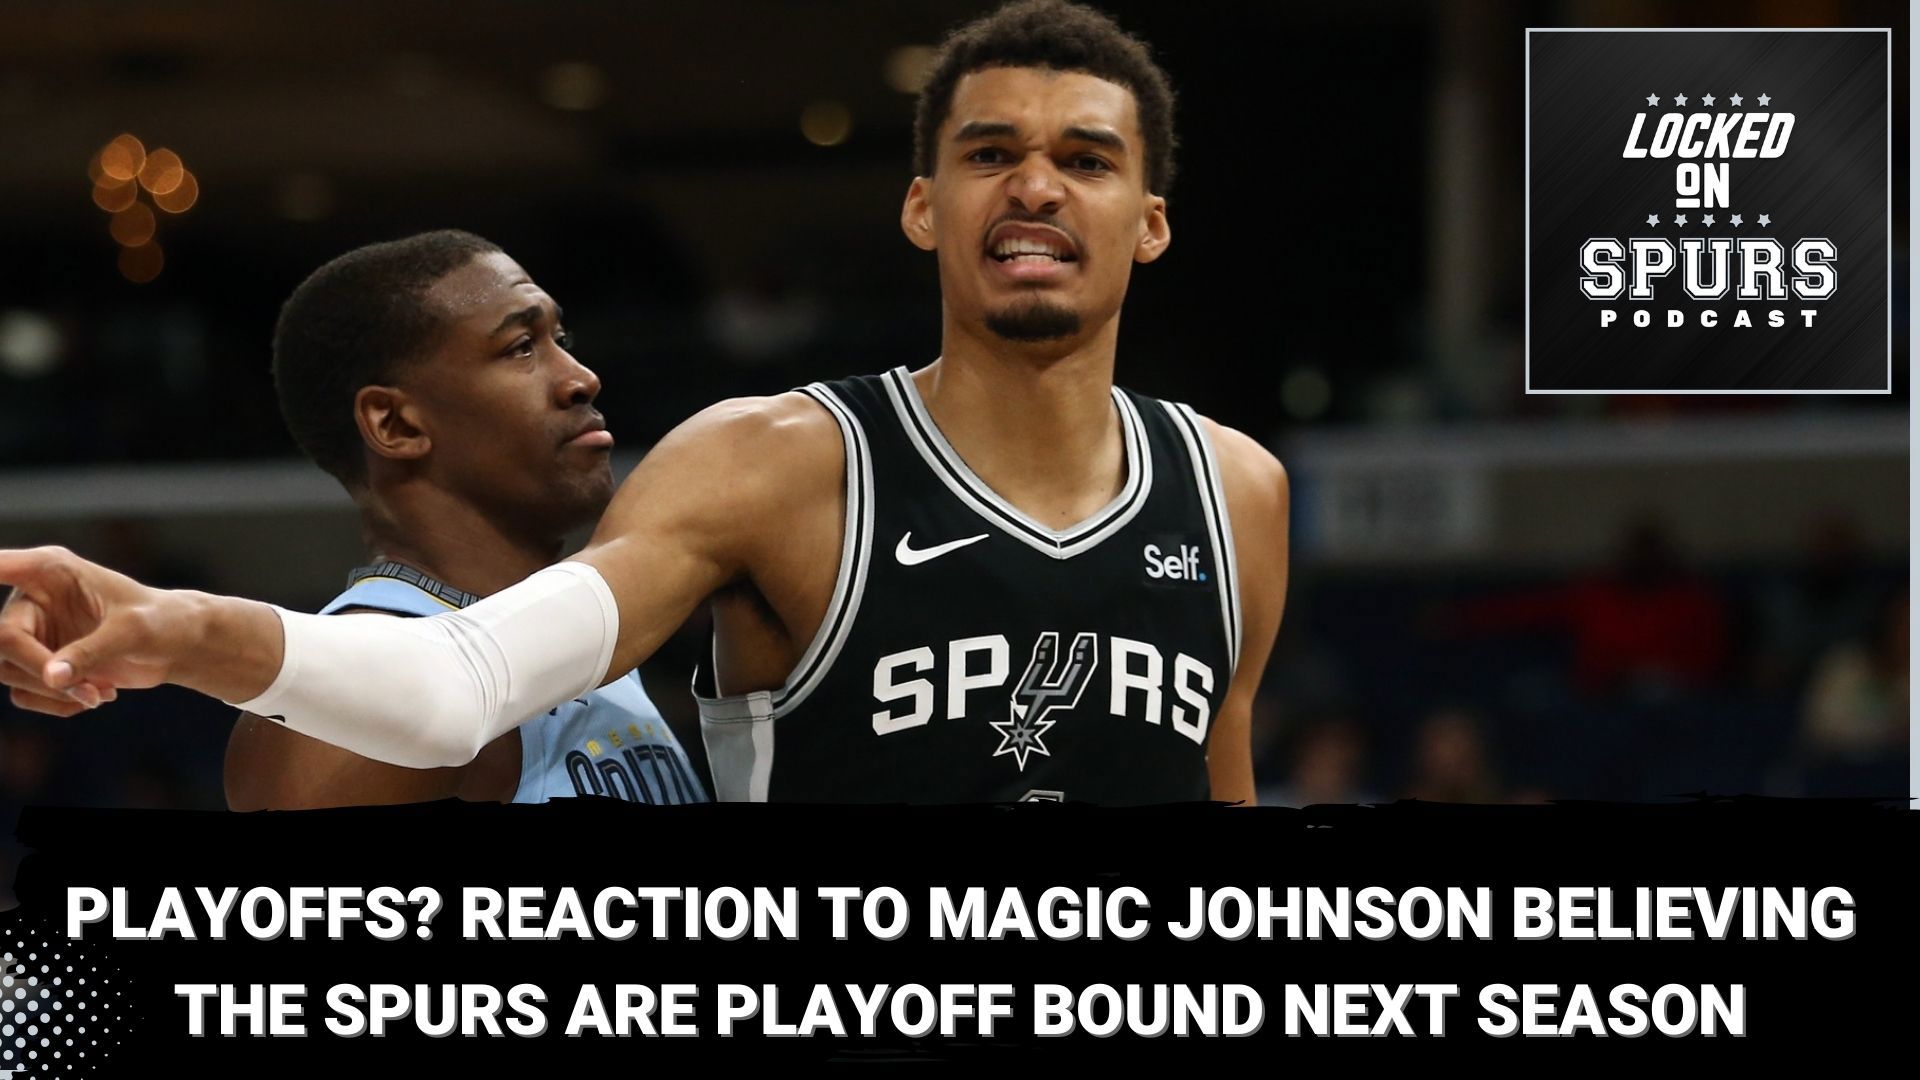 Is Magic right to believe the Spurs will be in the playoffs as soon as next season?